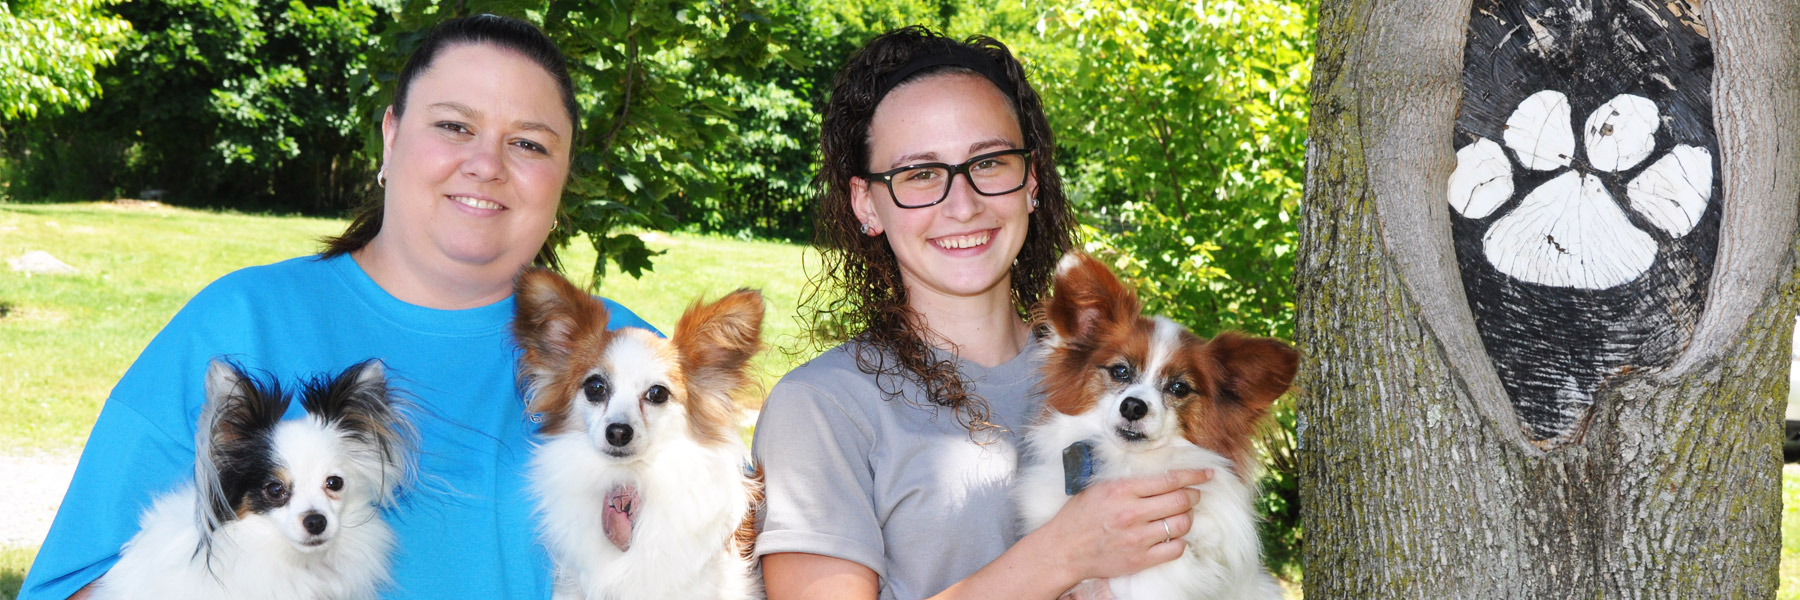 Melissa is holding Kristmas is on the left, and Jerzey Girl on the right. Shayla is holding a papillon, named Dublin.